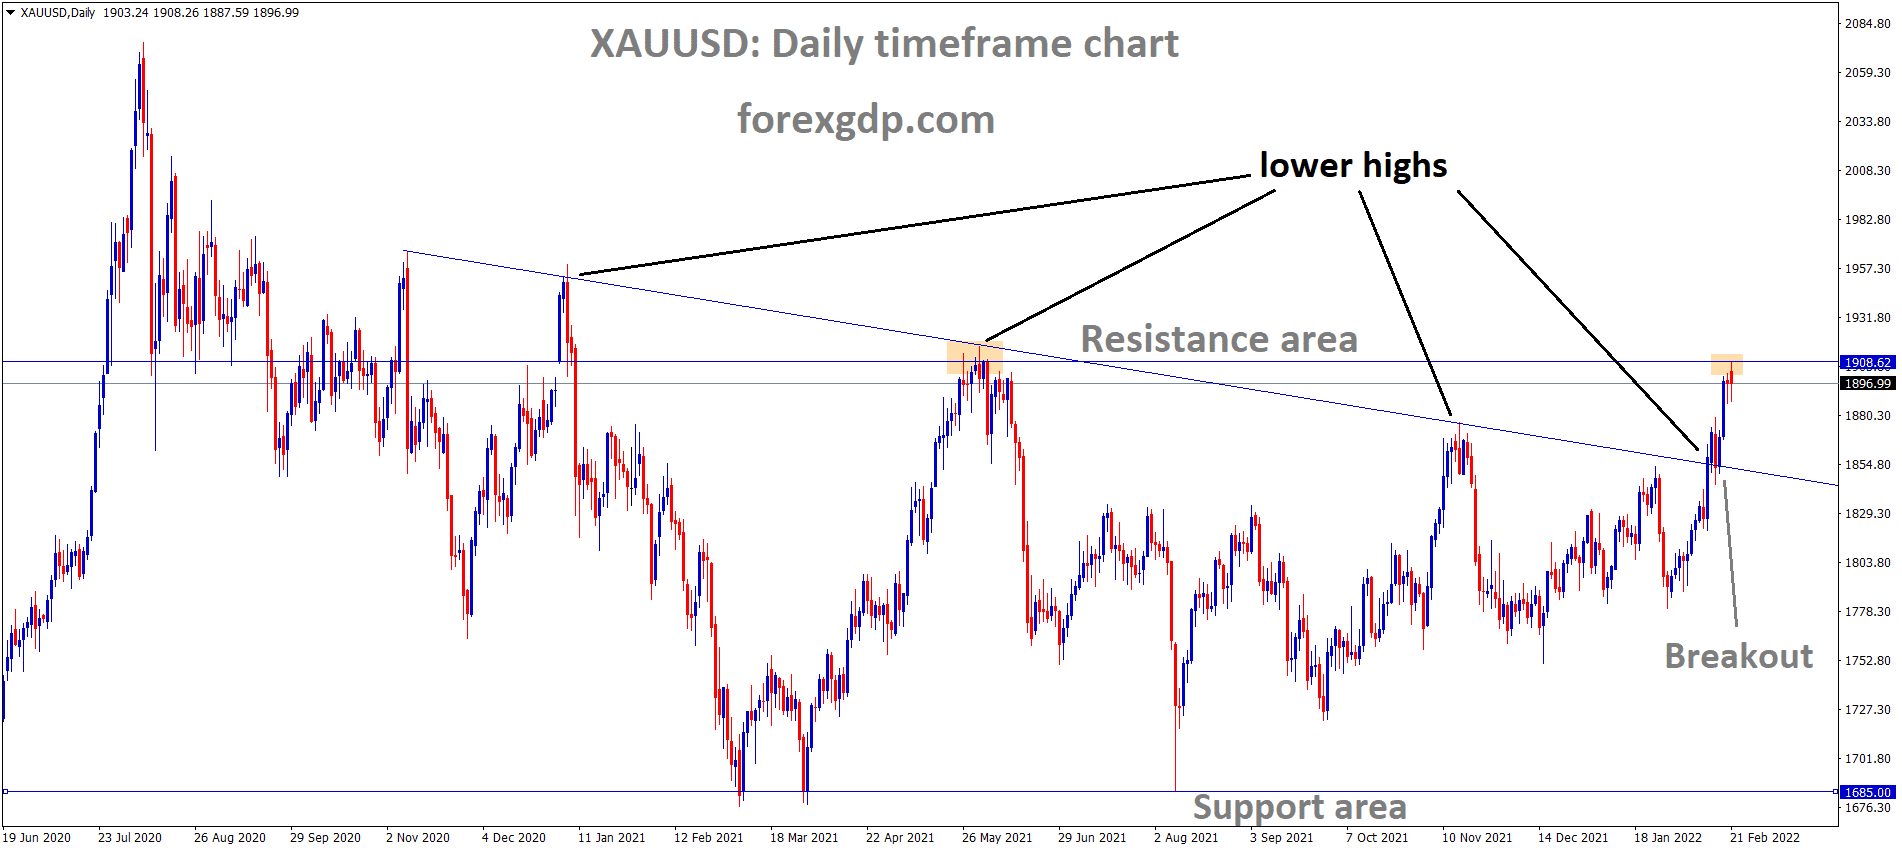 XAUUSD Gold price has reached the Resistance area of the Box Pattern and broken the Descending triangle pattern.